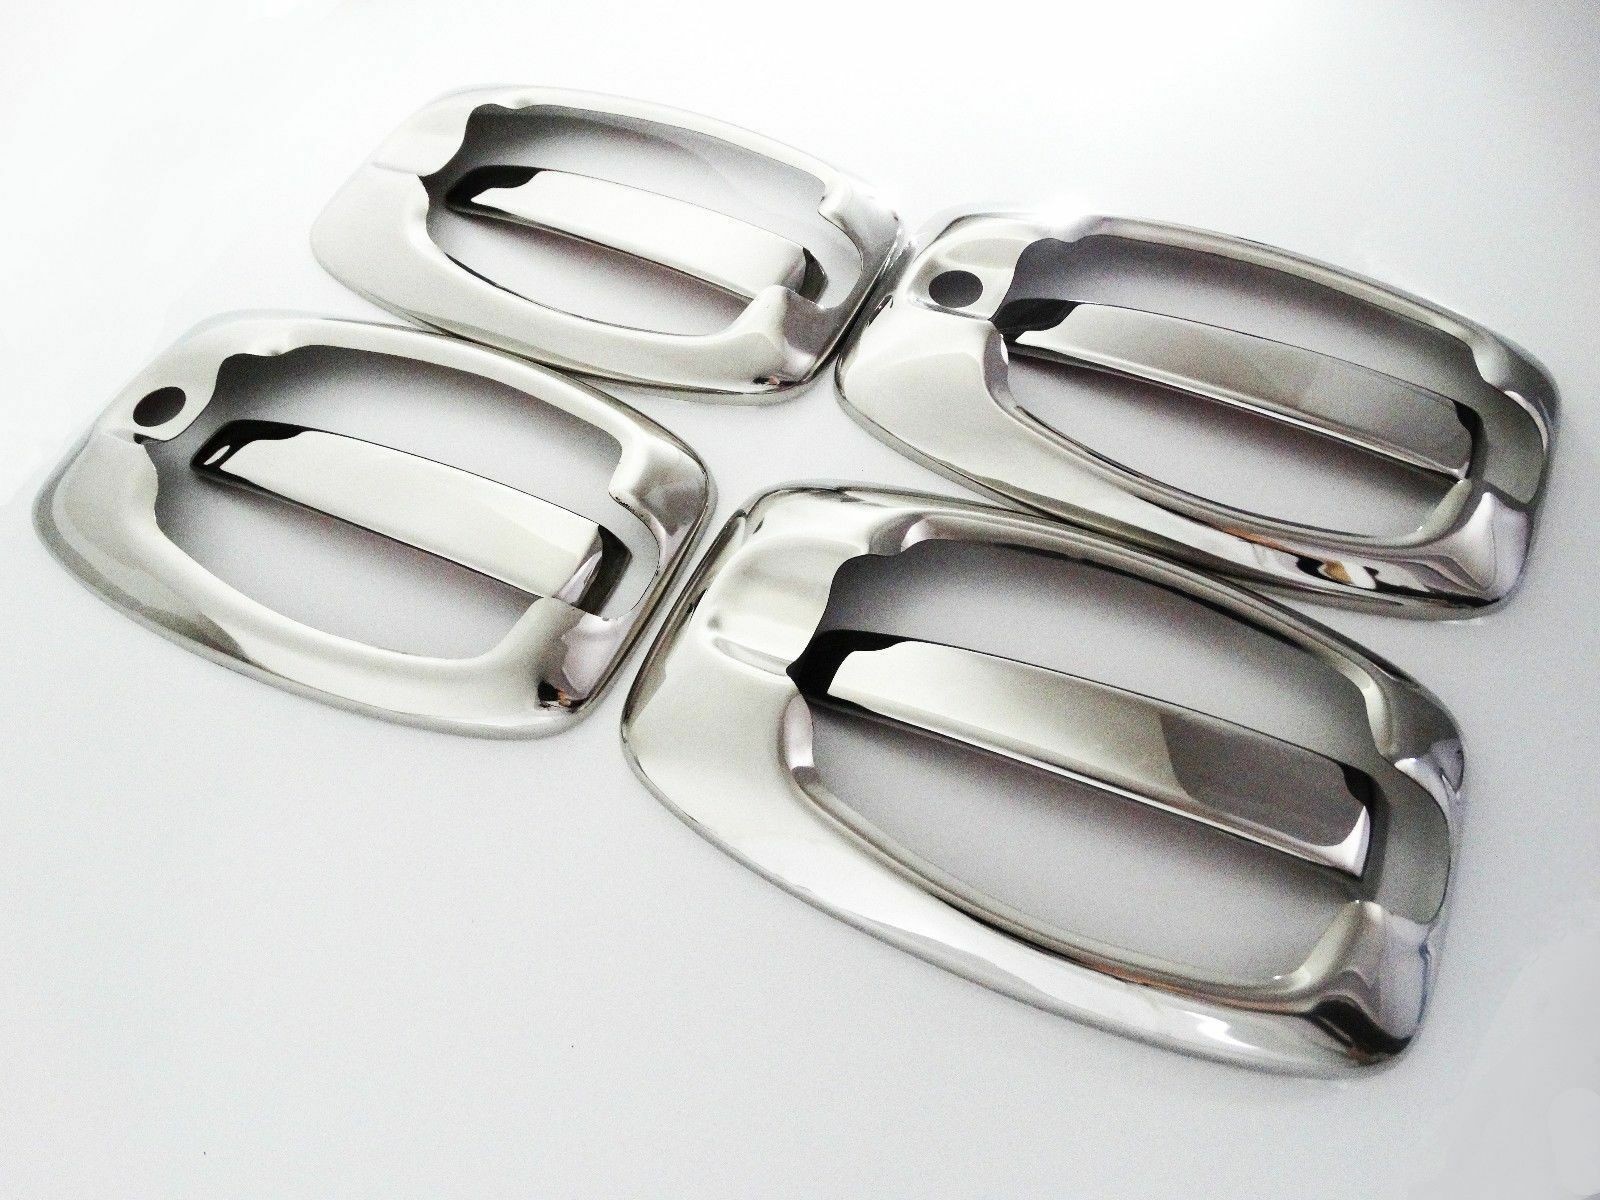 Dodge Ram Promaster 2006 Up ABS Chrome Mirror Cover & Chrome Door Handle Cover (10 Pieces)